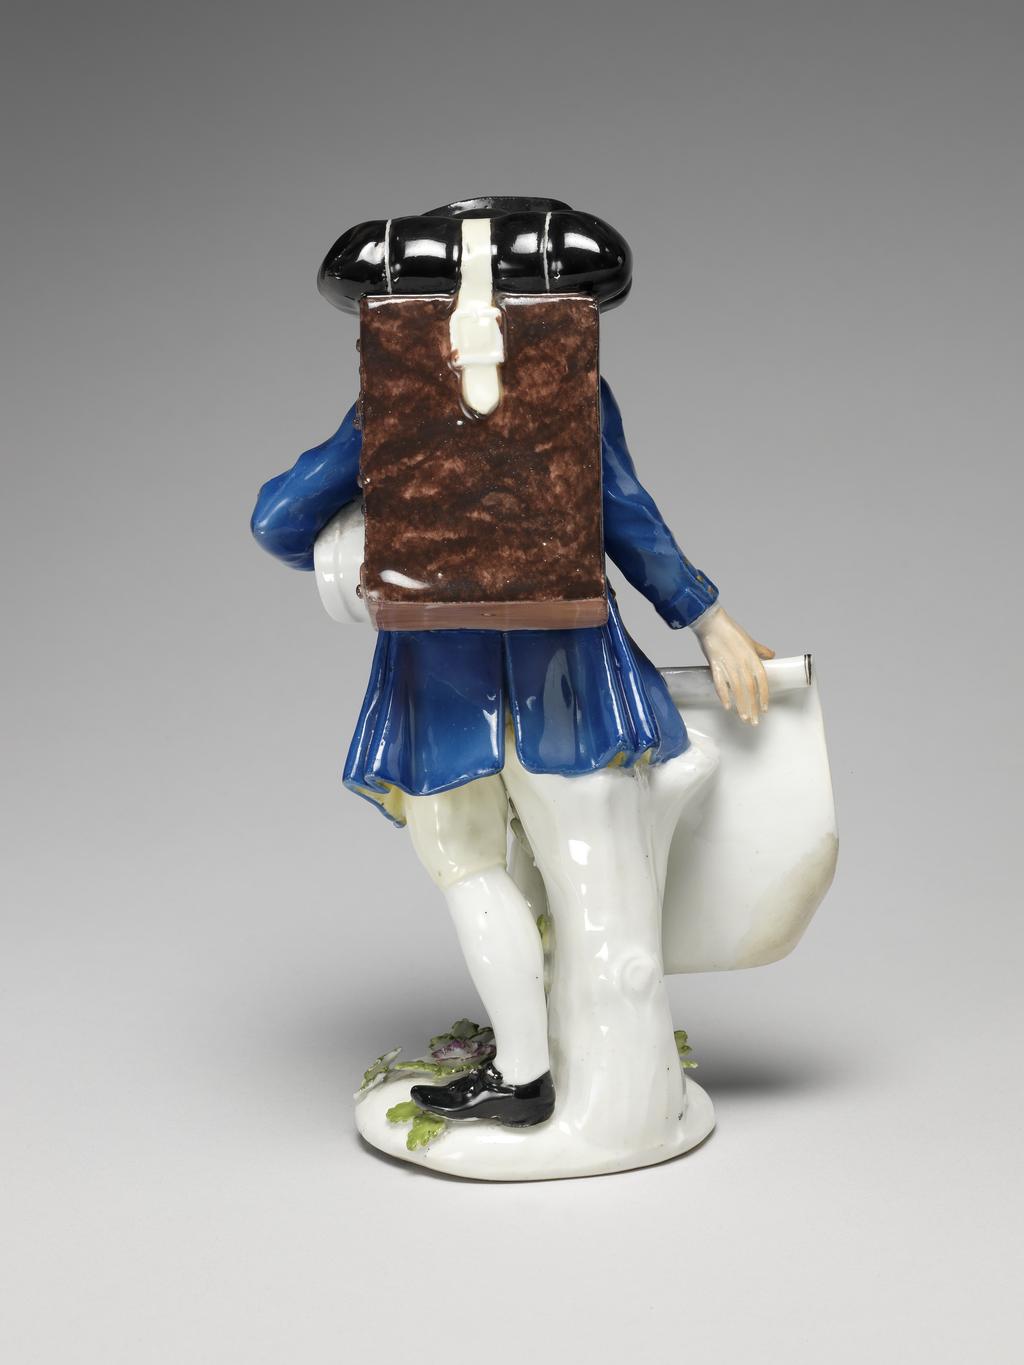 An image of A map-seller. Meissen Porcelain Manufactory, Saxony. With his right hand he holds out a map of the British Isles, in the lower proper right corner figures of Mercury and Britiannia with a bale of merchandize. Under his left arm he carries a white band box. On his back, slung from his shoulders by yellow straps, he carries a mottled-brown cabinet with nine drawers, on top of which is a black hold-all secured by a broad cream-coloured strap. Hard-paste porcelain, press-moulded, glazed, and painted in enamels and gilt, height, whole, 16.9 cm, width, 10 cm, circa 1750-1755. After a model of 1744. Production Note: This model was based on the first print of the third set of Etudes prises dans le bas peuple ou les Cris de Paris, issued in 1738, engraved by the comte de Caylus (1692-1765) after drawings by Edmé Bouchardon (1689-1762) . It is smaller than the first figure modelled after this engraving in 1744. Unusually, the map seller holds a map of the British Isles.